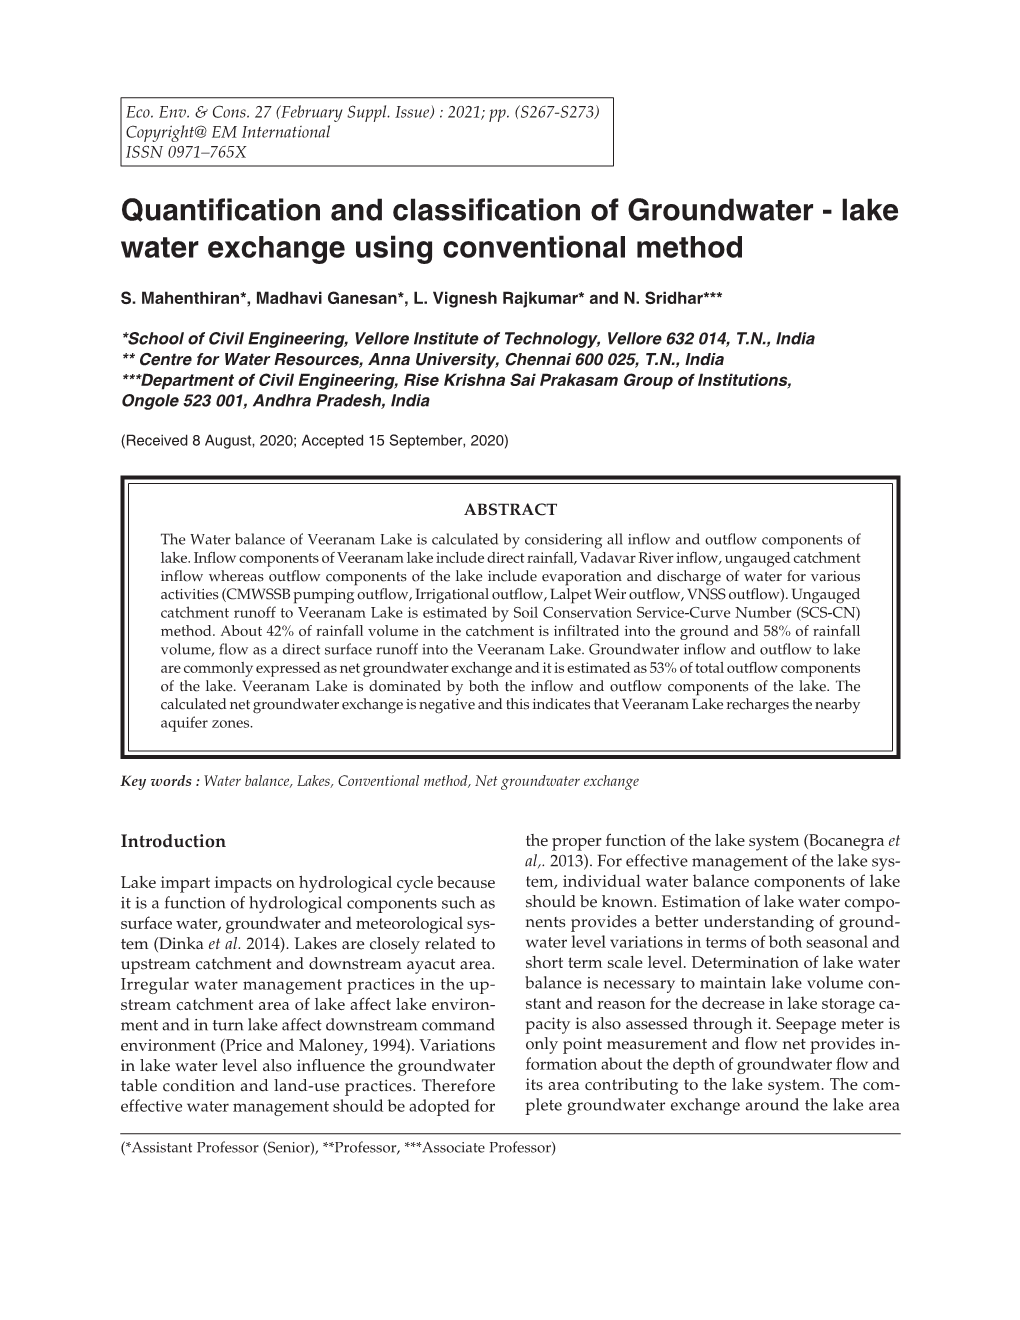 Quantification and Classification of Groundwater - Lake Water Exchange Using Conventional Method